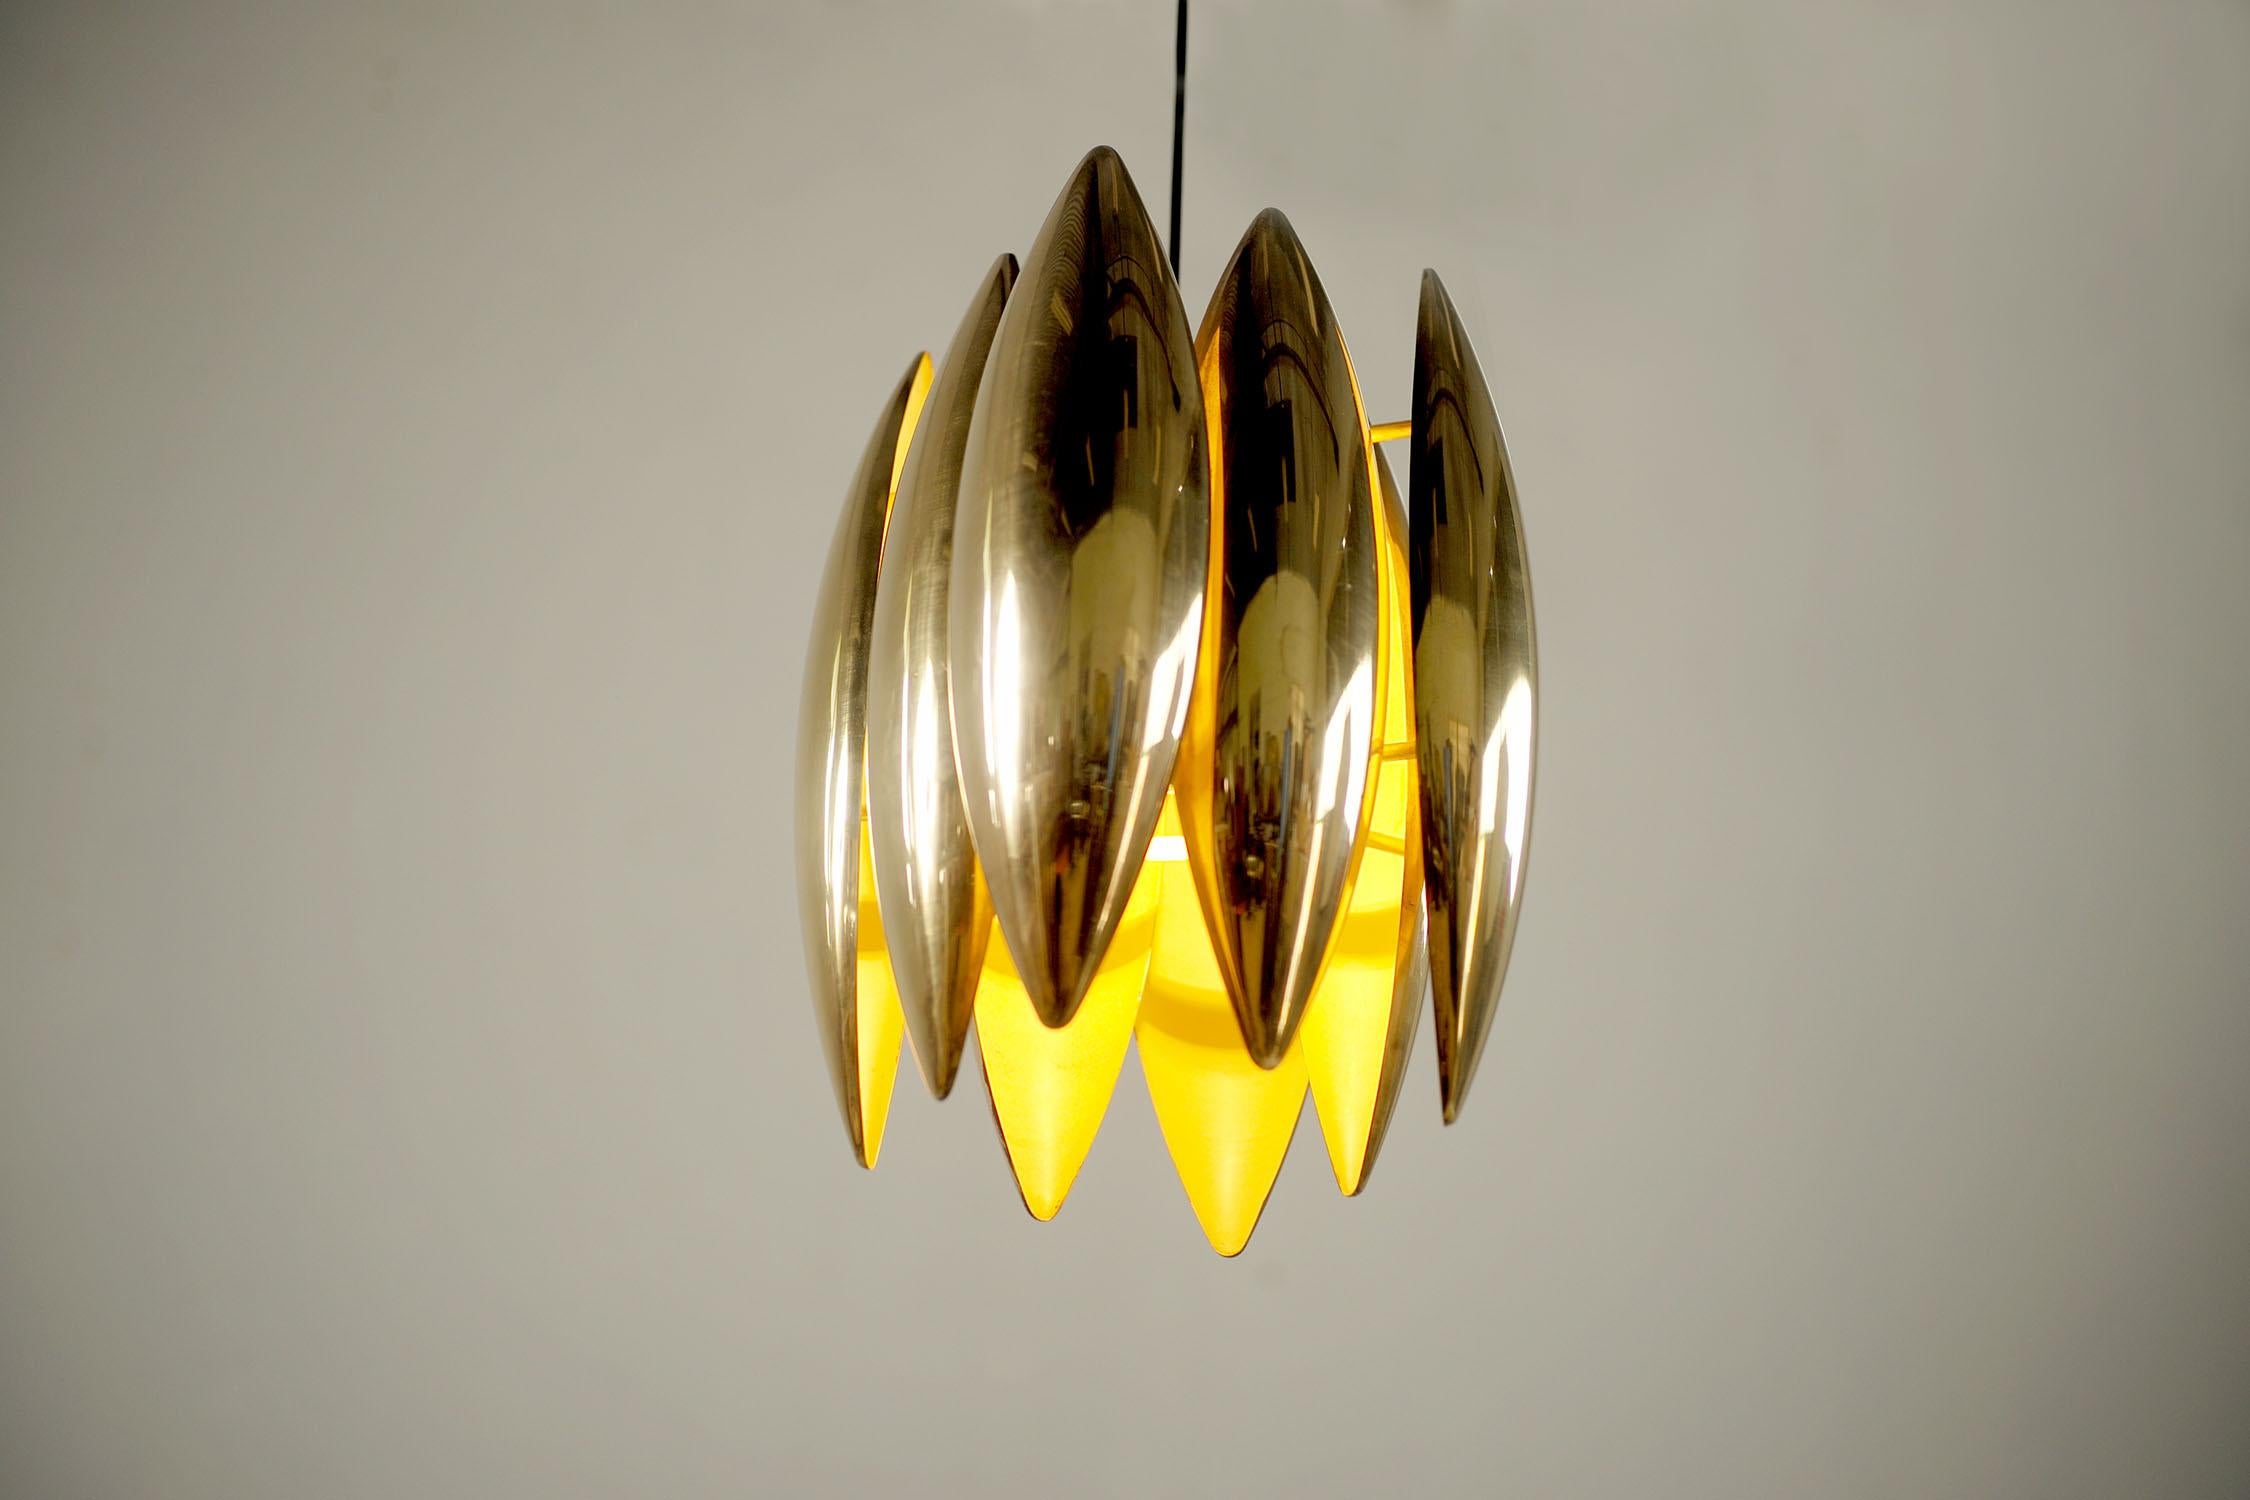 Kastor pendant light in gilded brass by Jo Hmmerborg for Fog & Mørup, Denmark 1969. The 8 reflectors are white lacquered on the inside, the bail cover is in brass. Of very good quality, this light is one of the most emblematic of Jo Hammerborg's